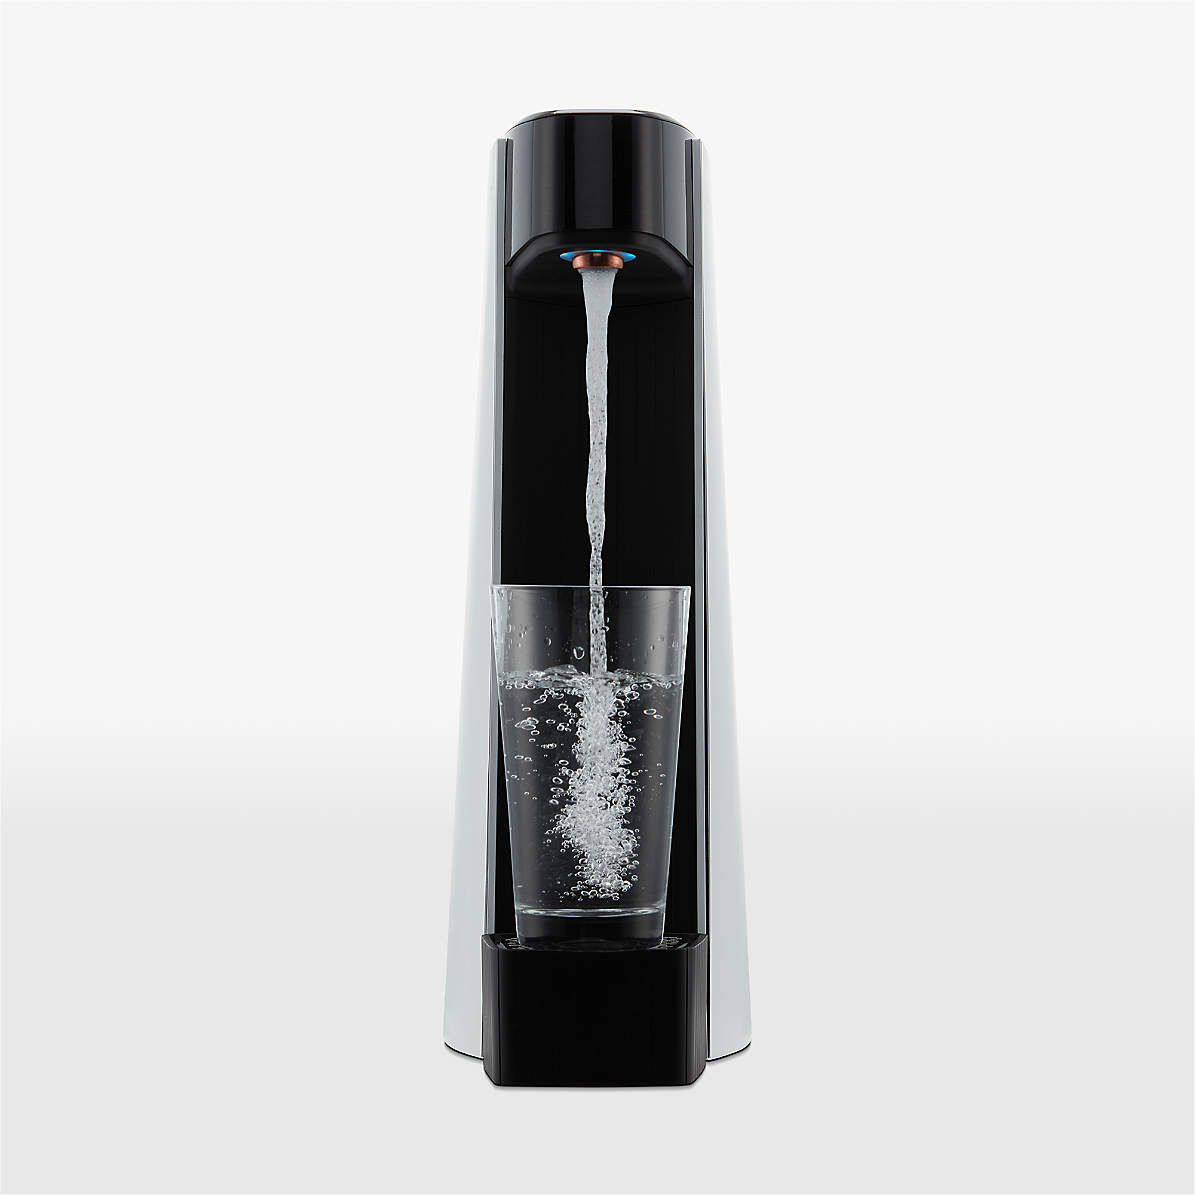 Carbon8 Sparkling Water Maker, Tested & Reviewed